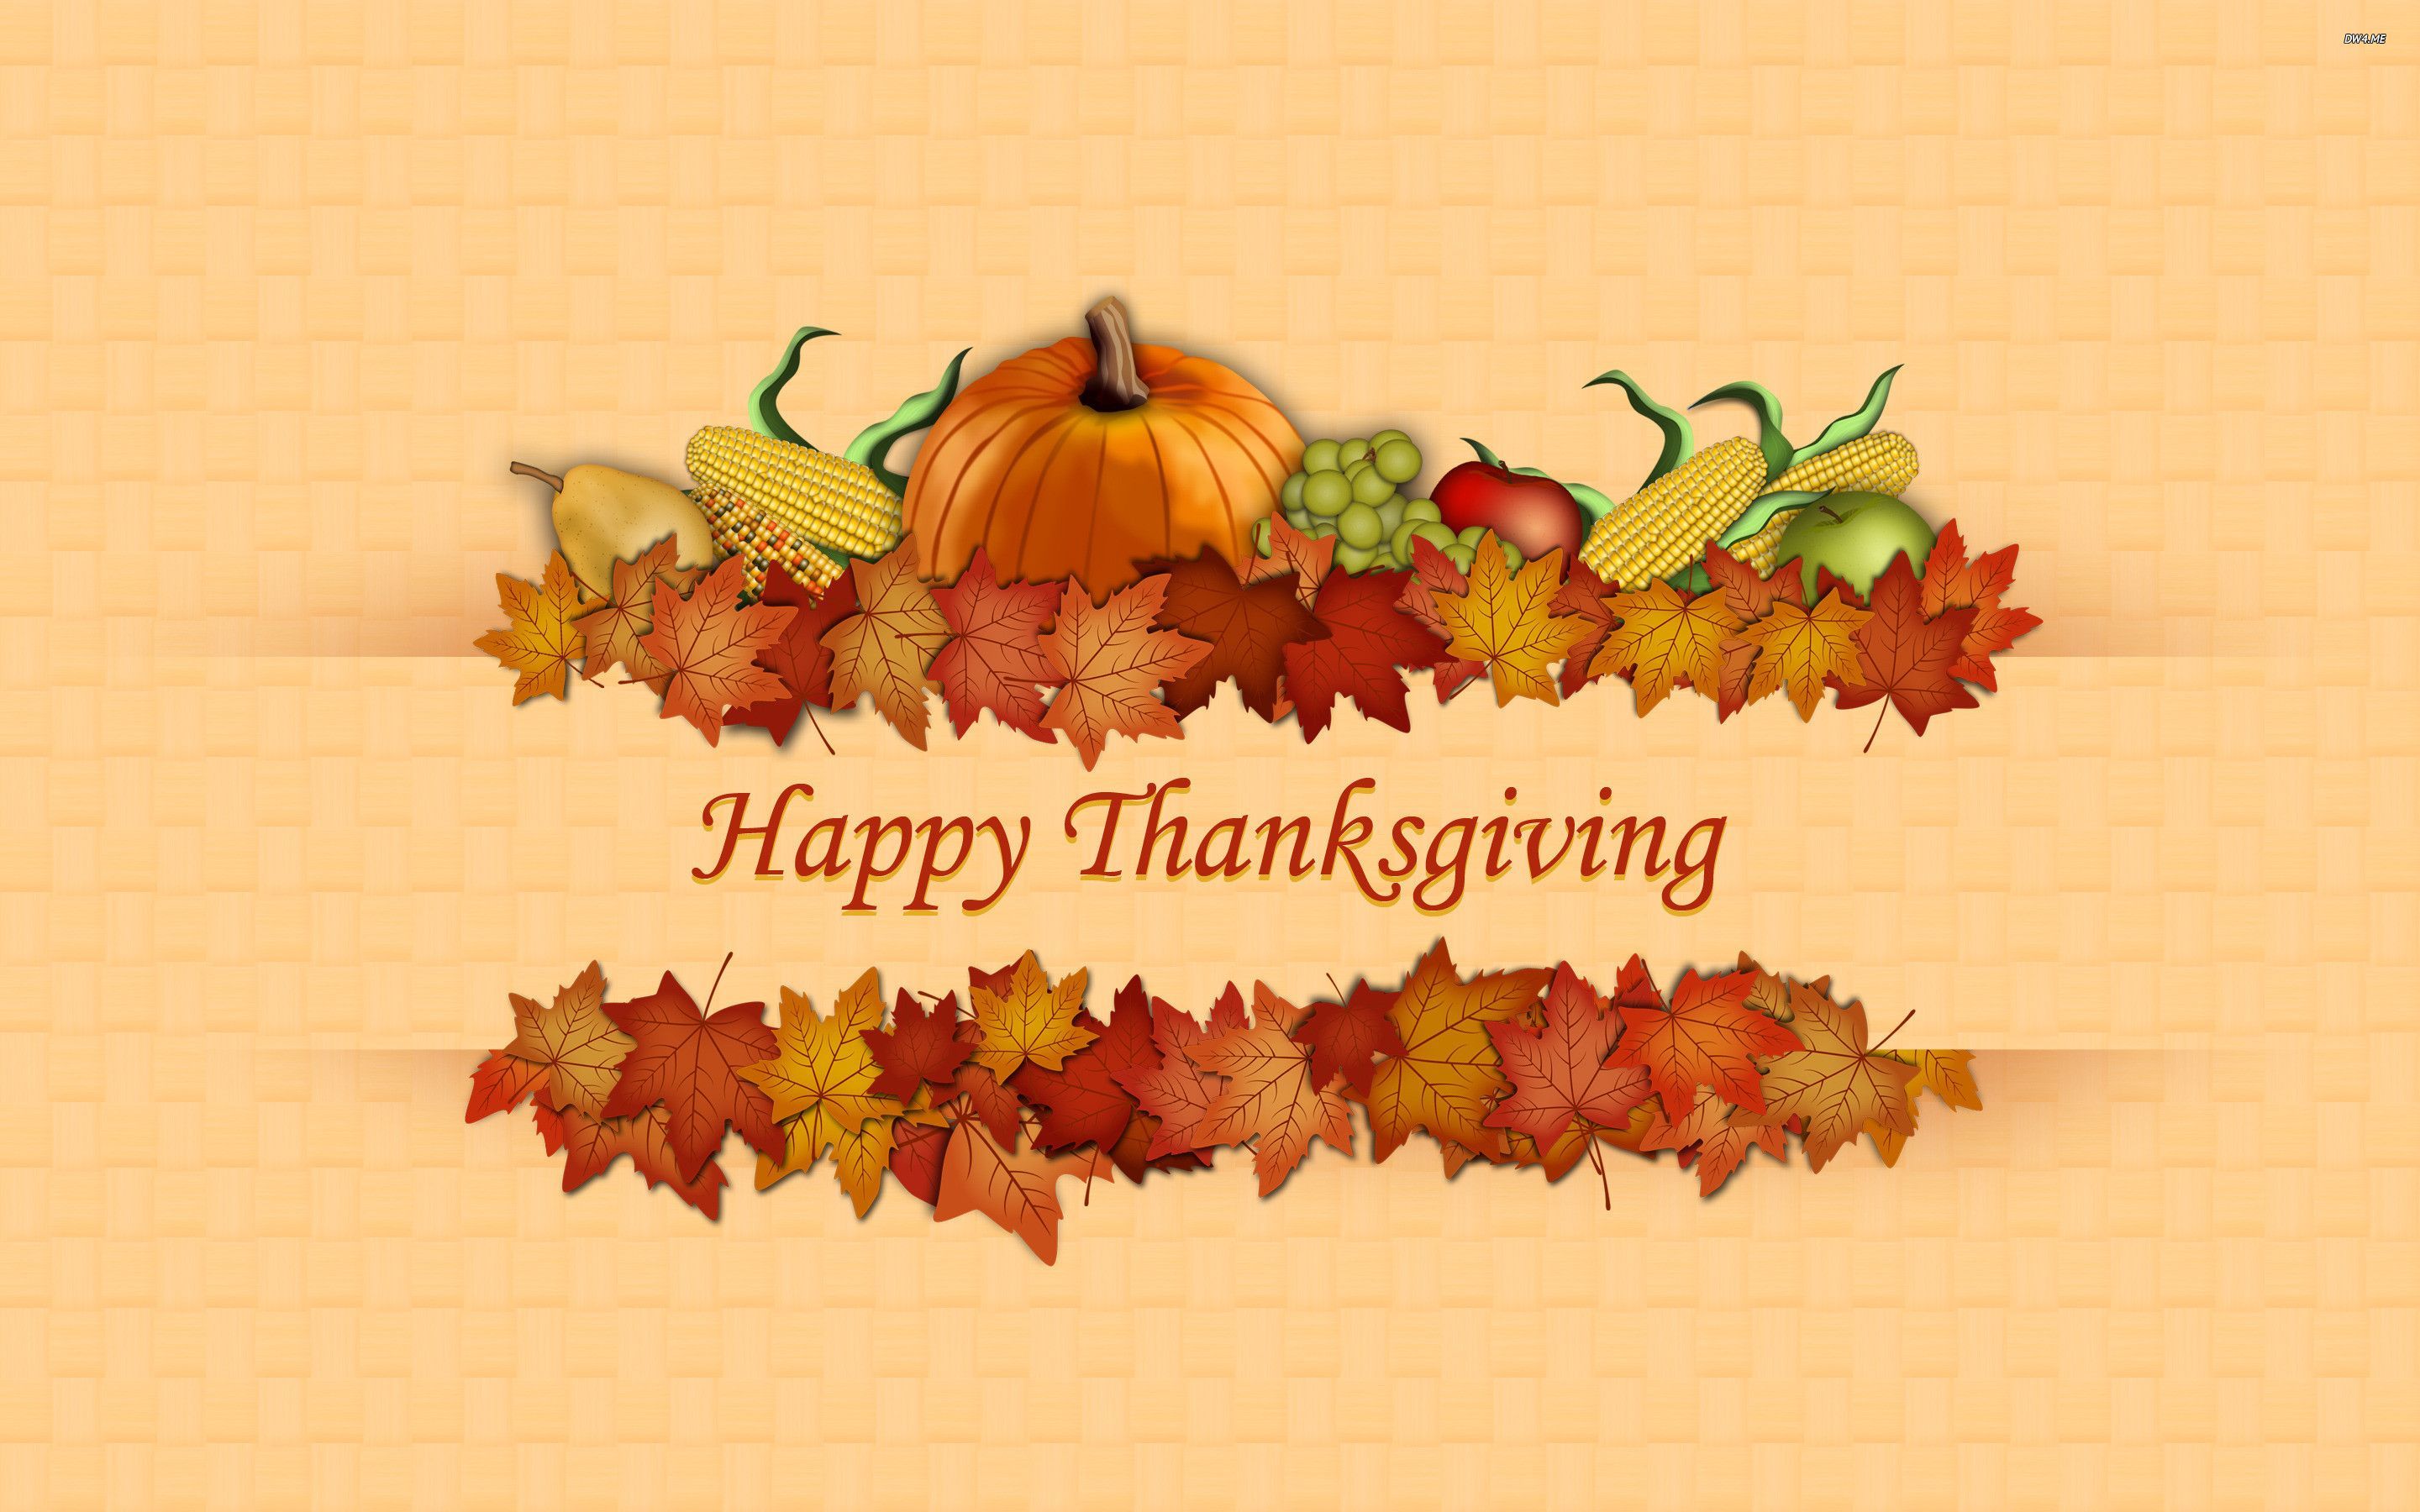 A happy thanksgiving greeting card with leaves and vegetables - Thanksgiving